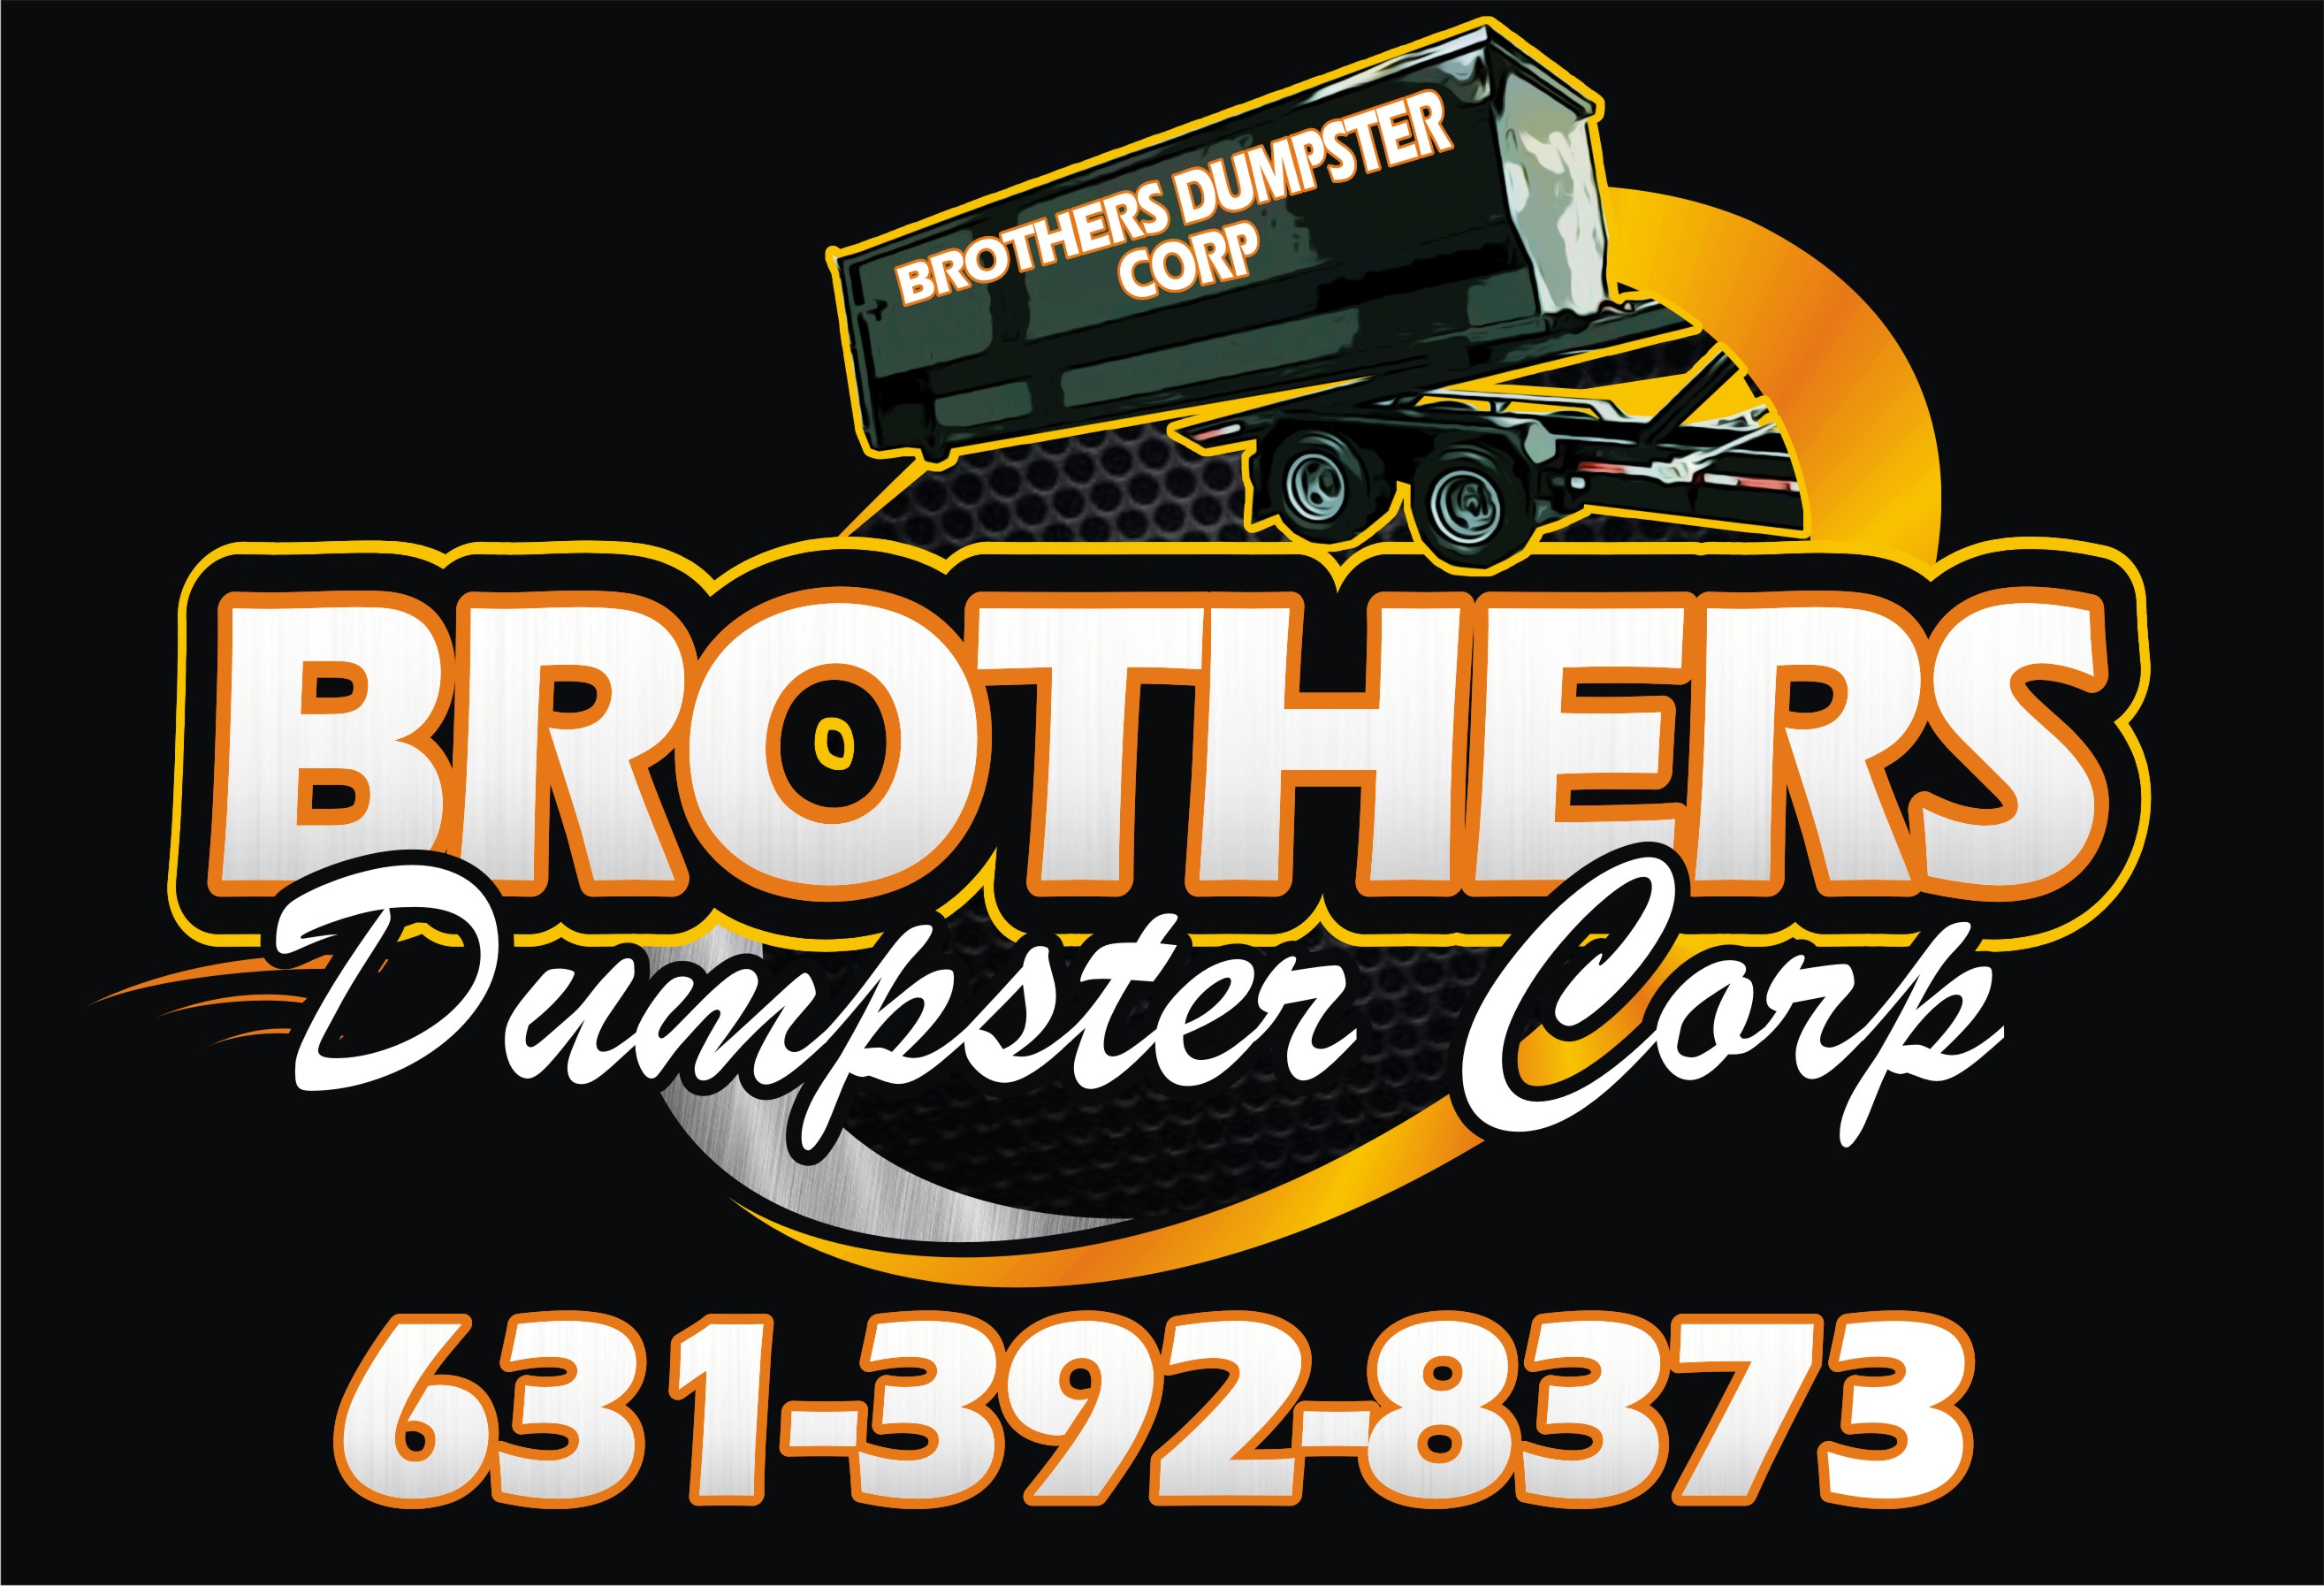 Brothers Dumpster Corp Logo